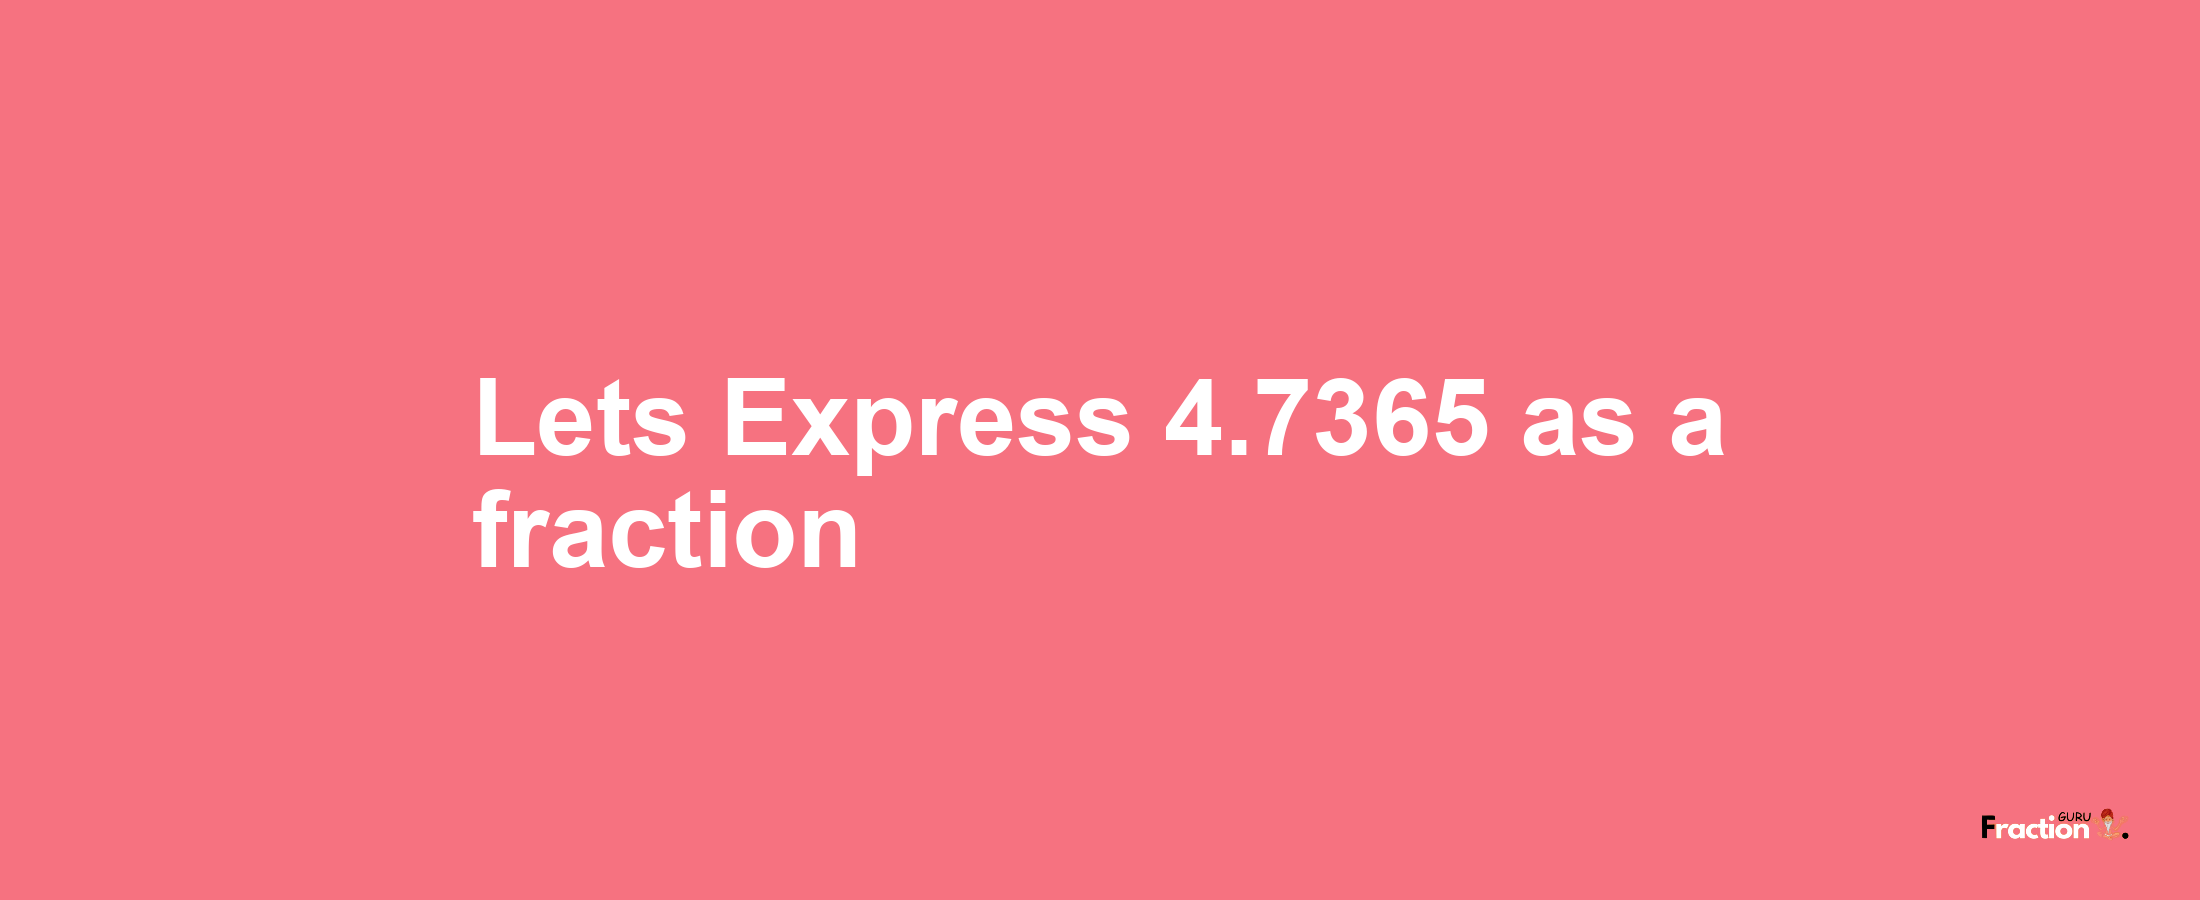 Lets Express 4.7365 as afraction